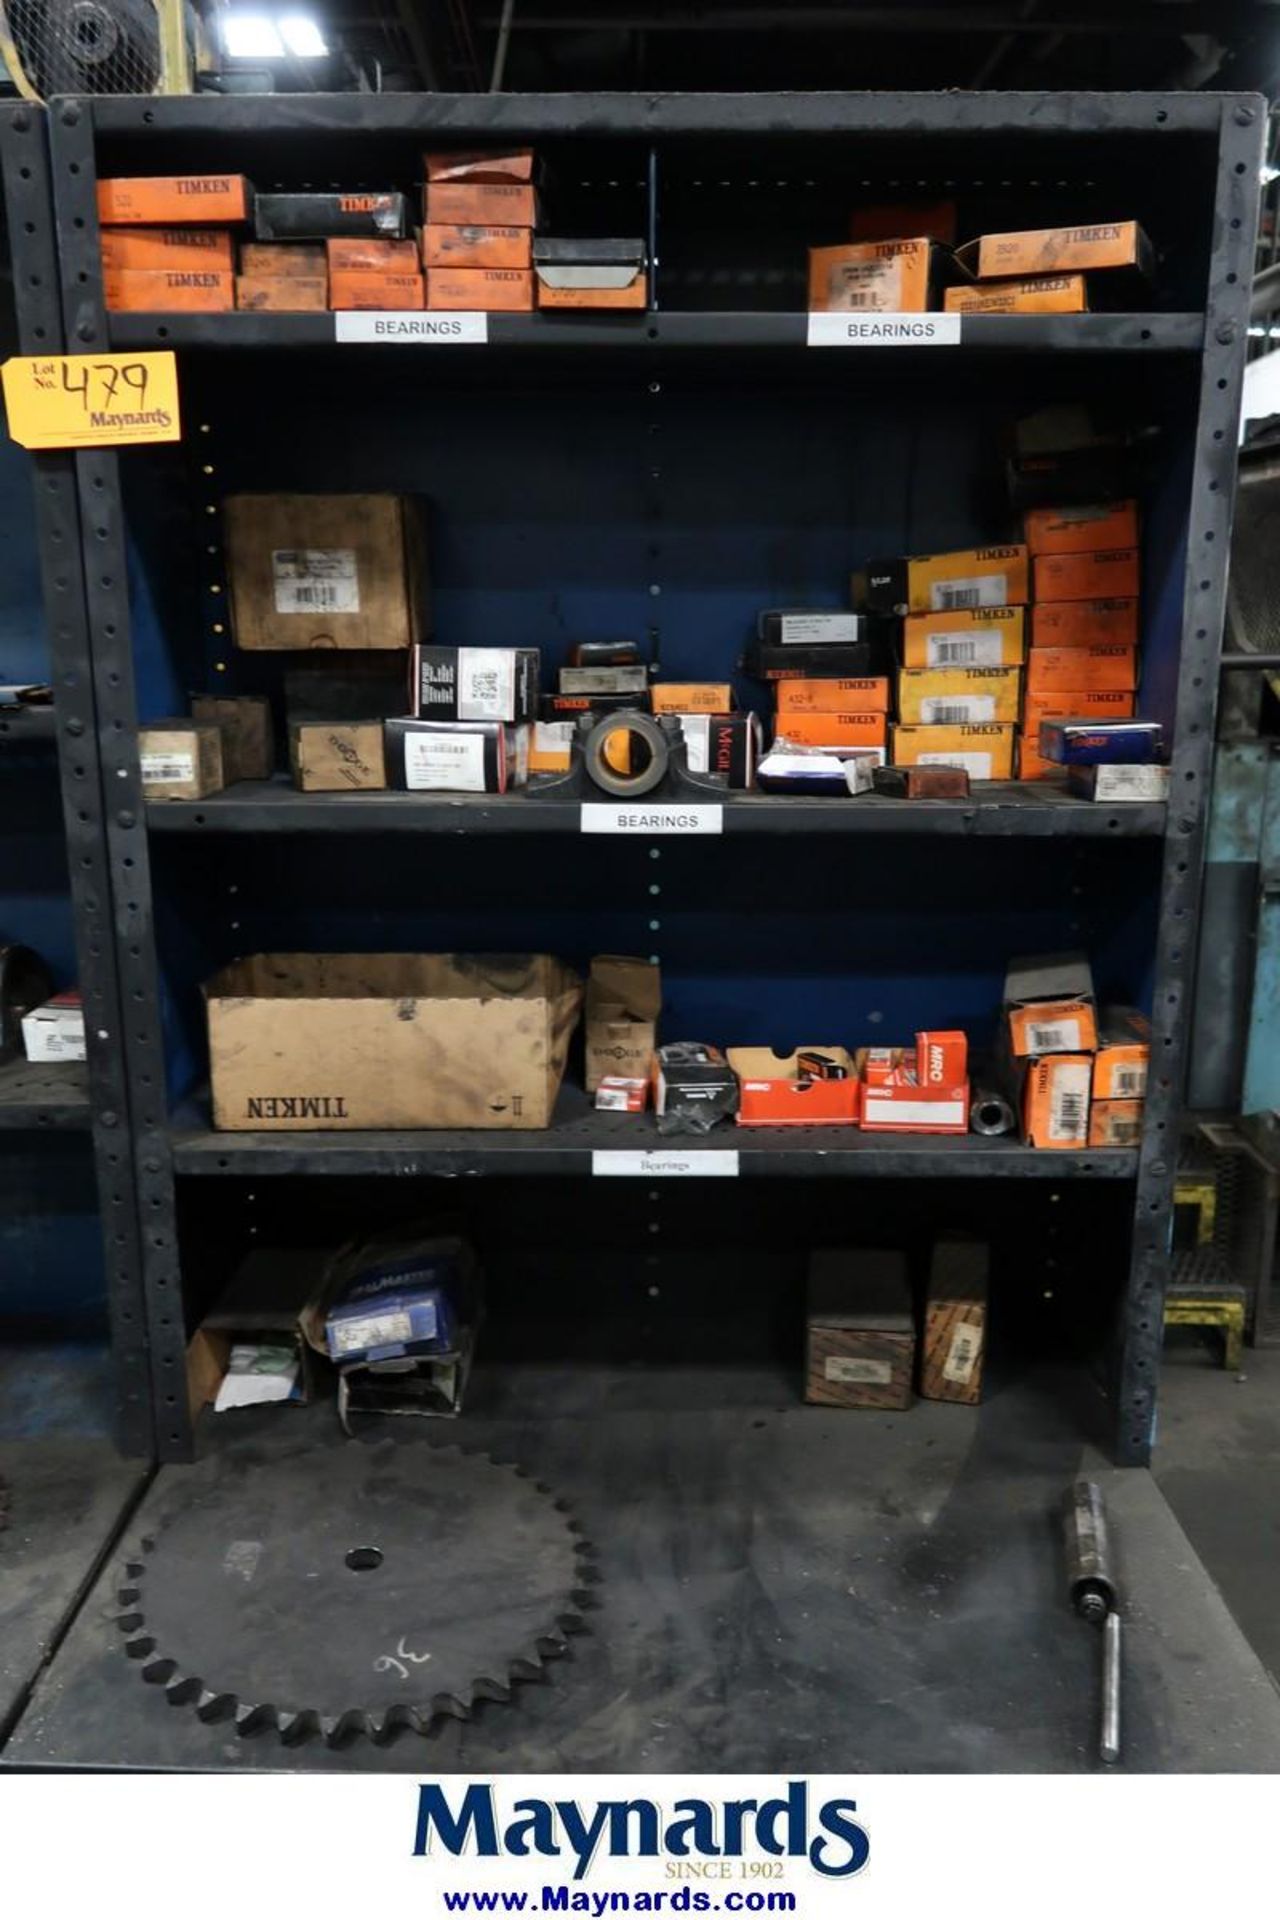 Adjustable Steel Shelving Units with Contents of Heat Treat Spare Parts - Image 11 of 16